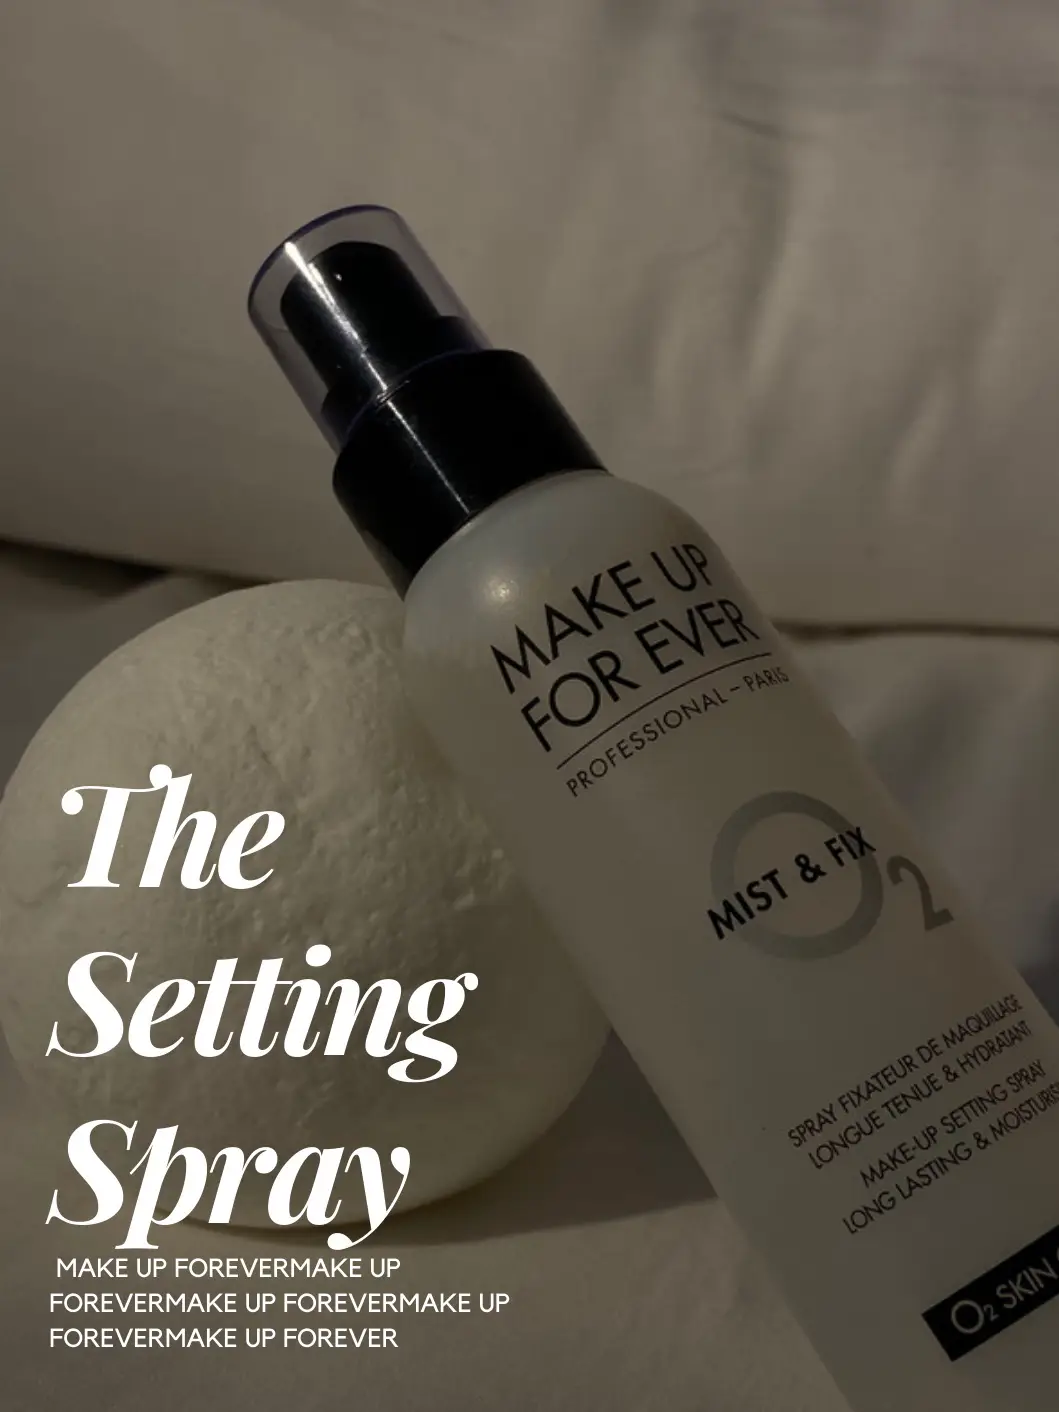 Make Up For Ever Mist & Fix - Setting Spray